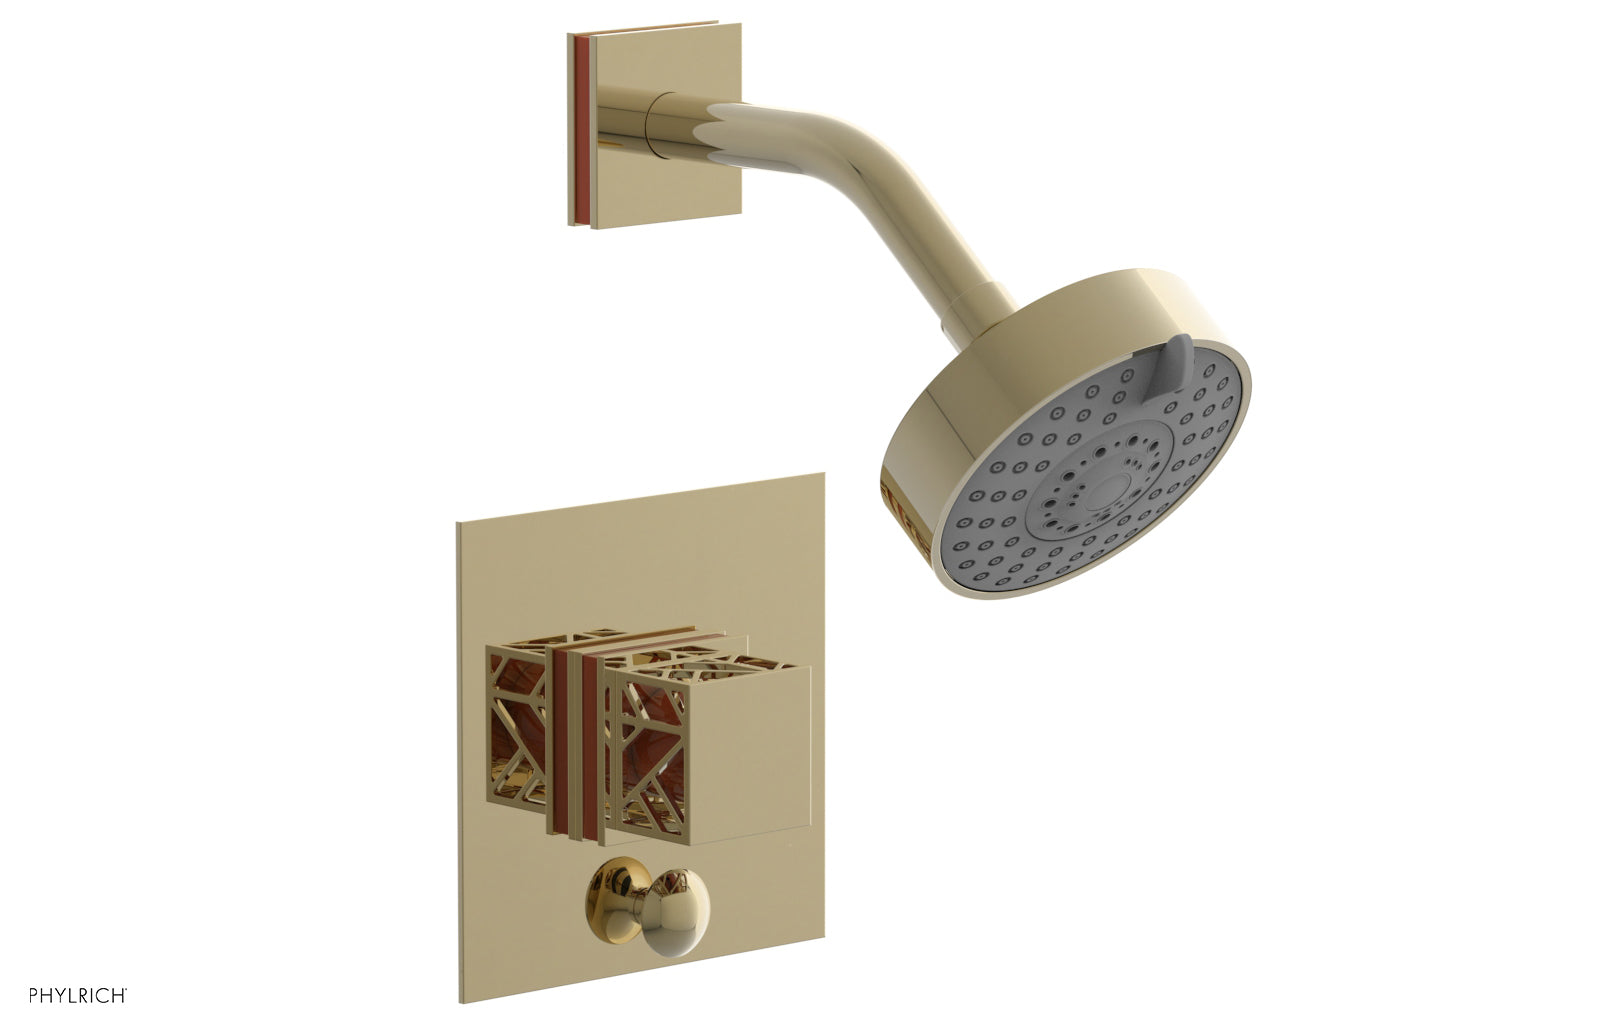 Phylrich JOLIE Pressure Balance Shower and Diverter Set (Less Spout), Square Handle with "Orange" Accents